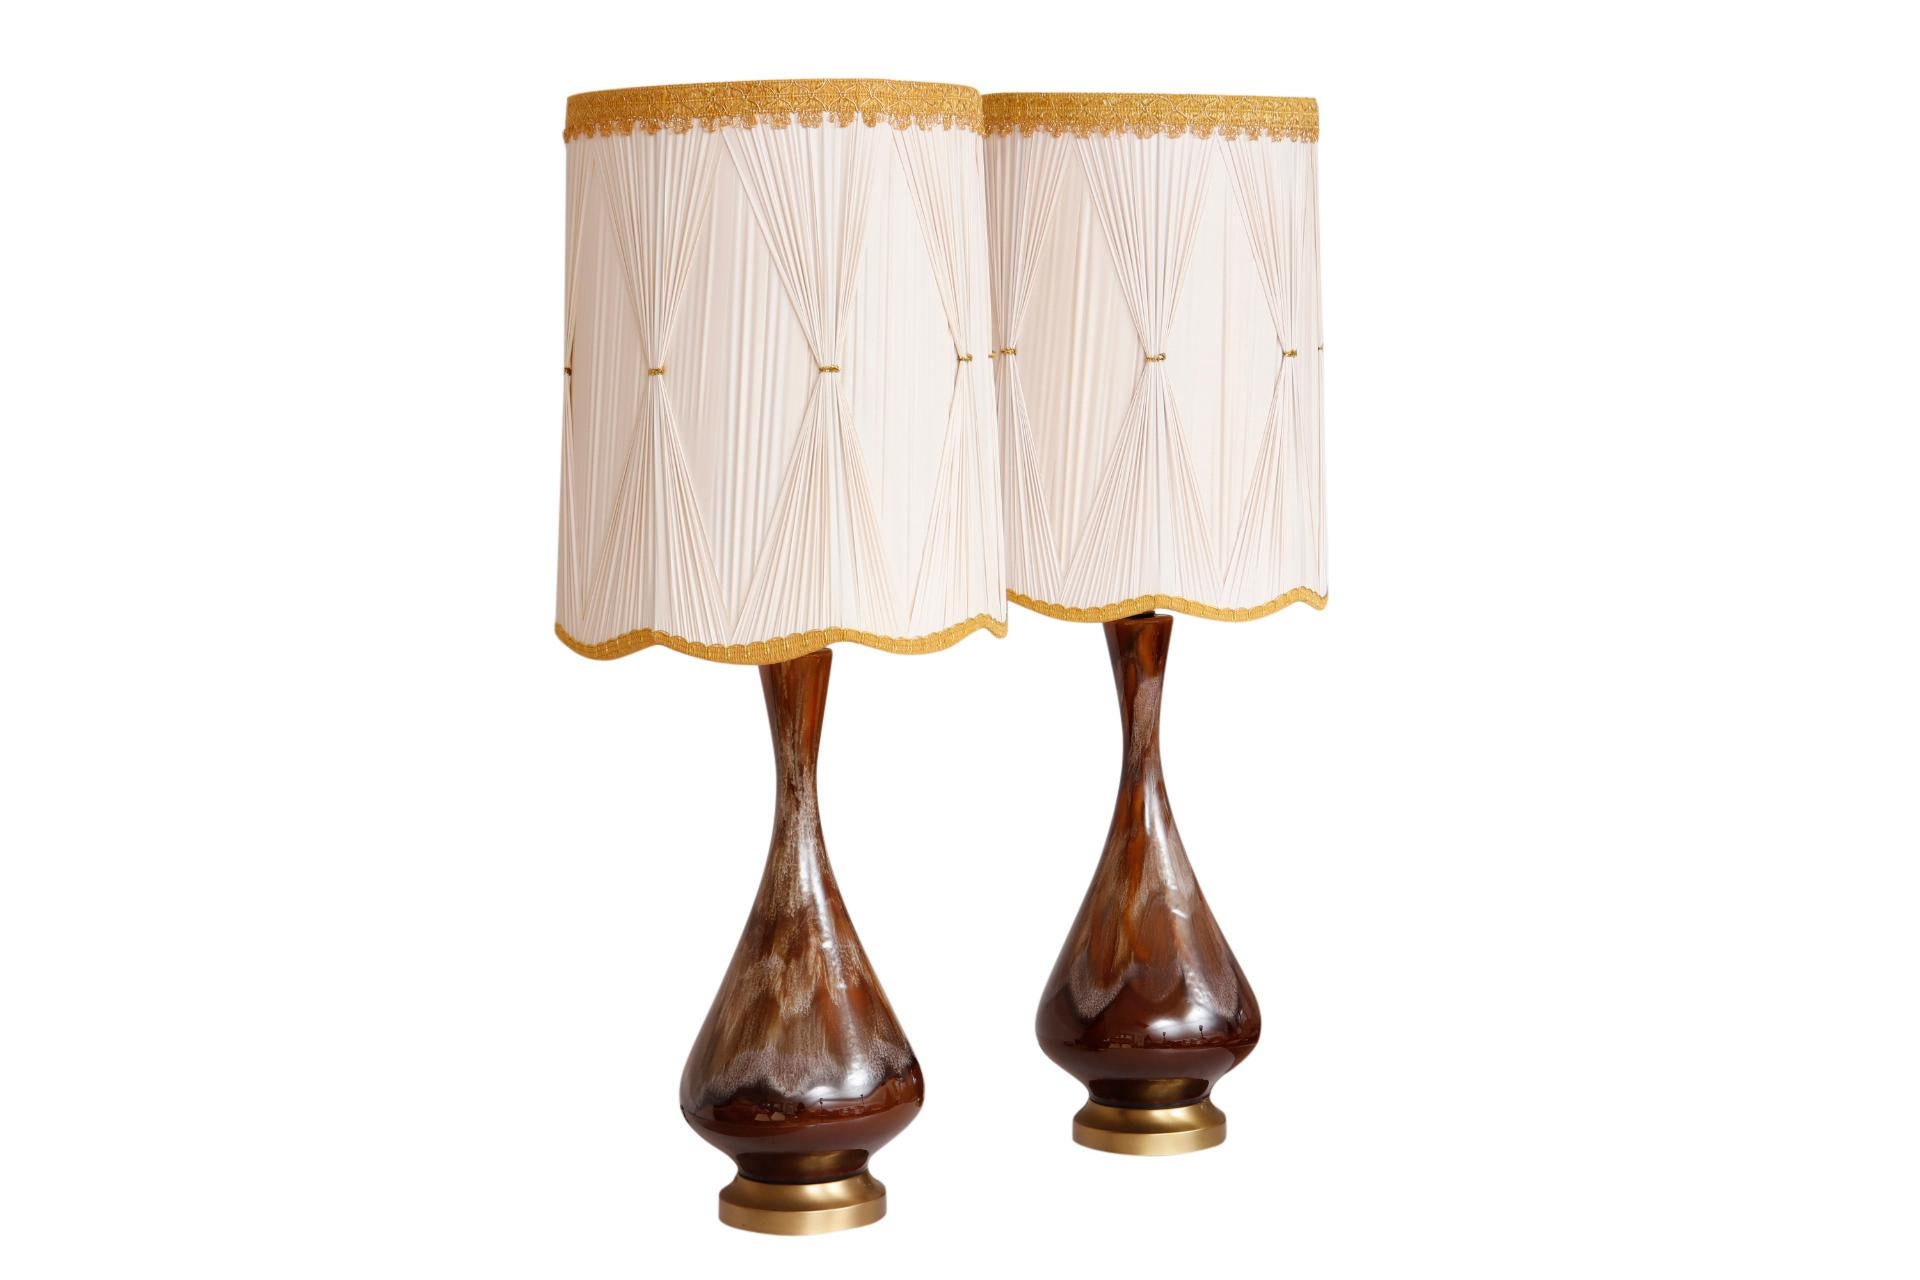 A pair of mid century drip glaze ceramic table lamps with custom shades. Round vases with slender necks are decorated in earthy shades of brown. Round beveled bases are made of brass. Shades are custom made of vinyl with pinched pleats trimmed with